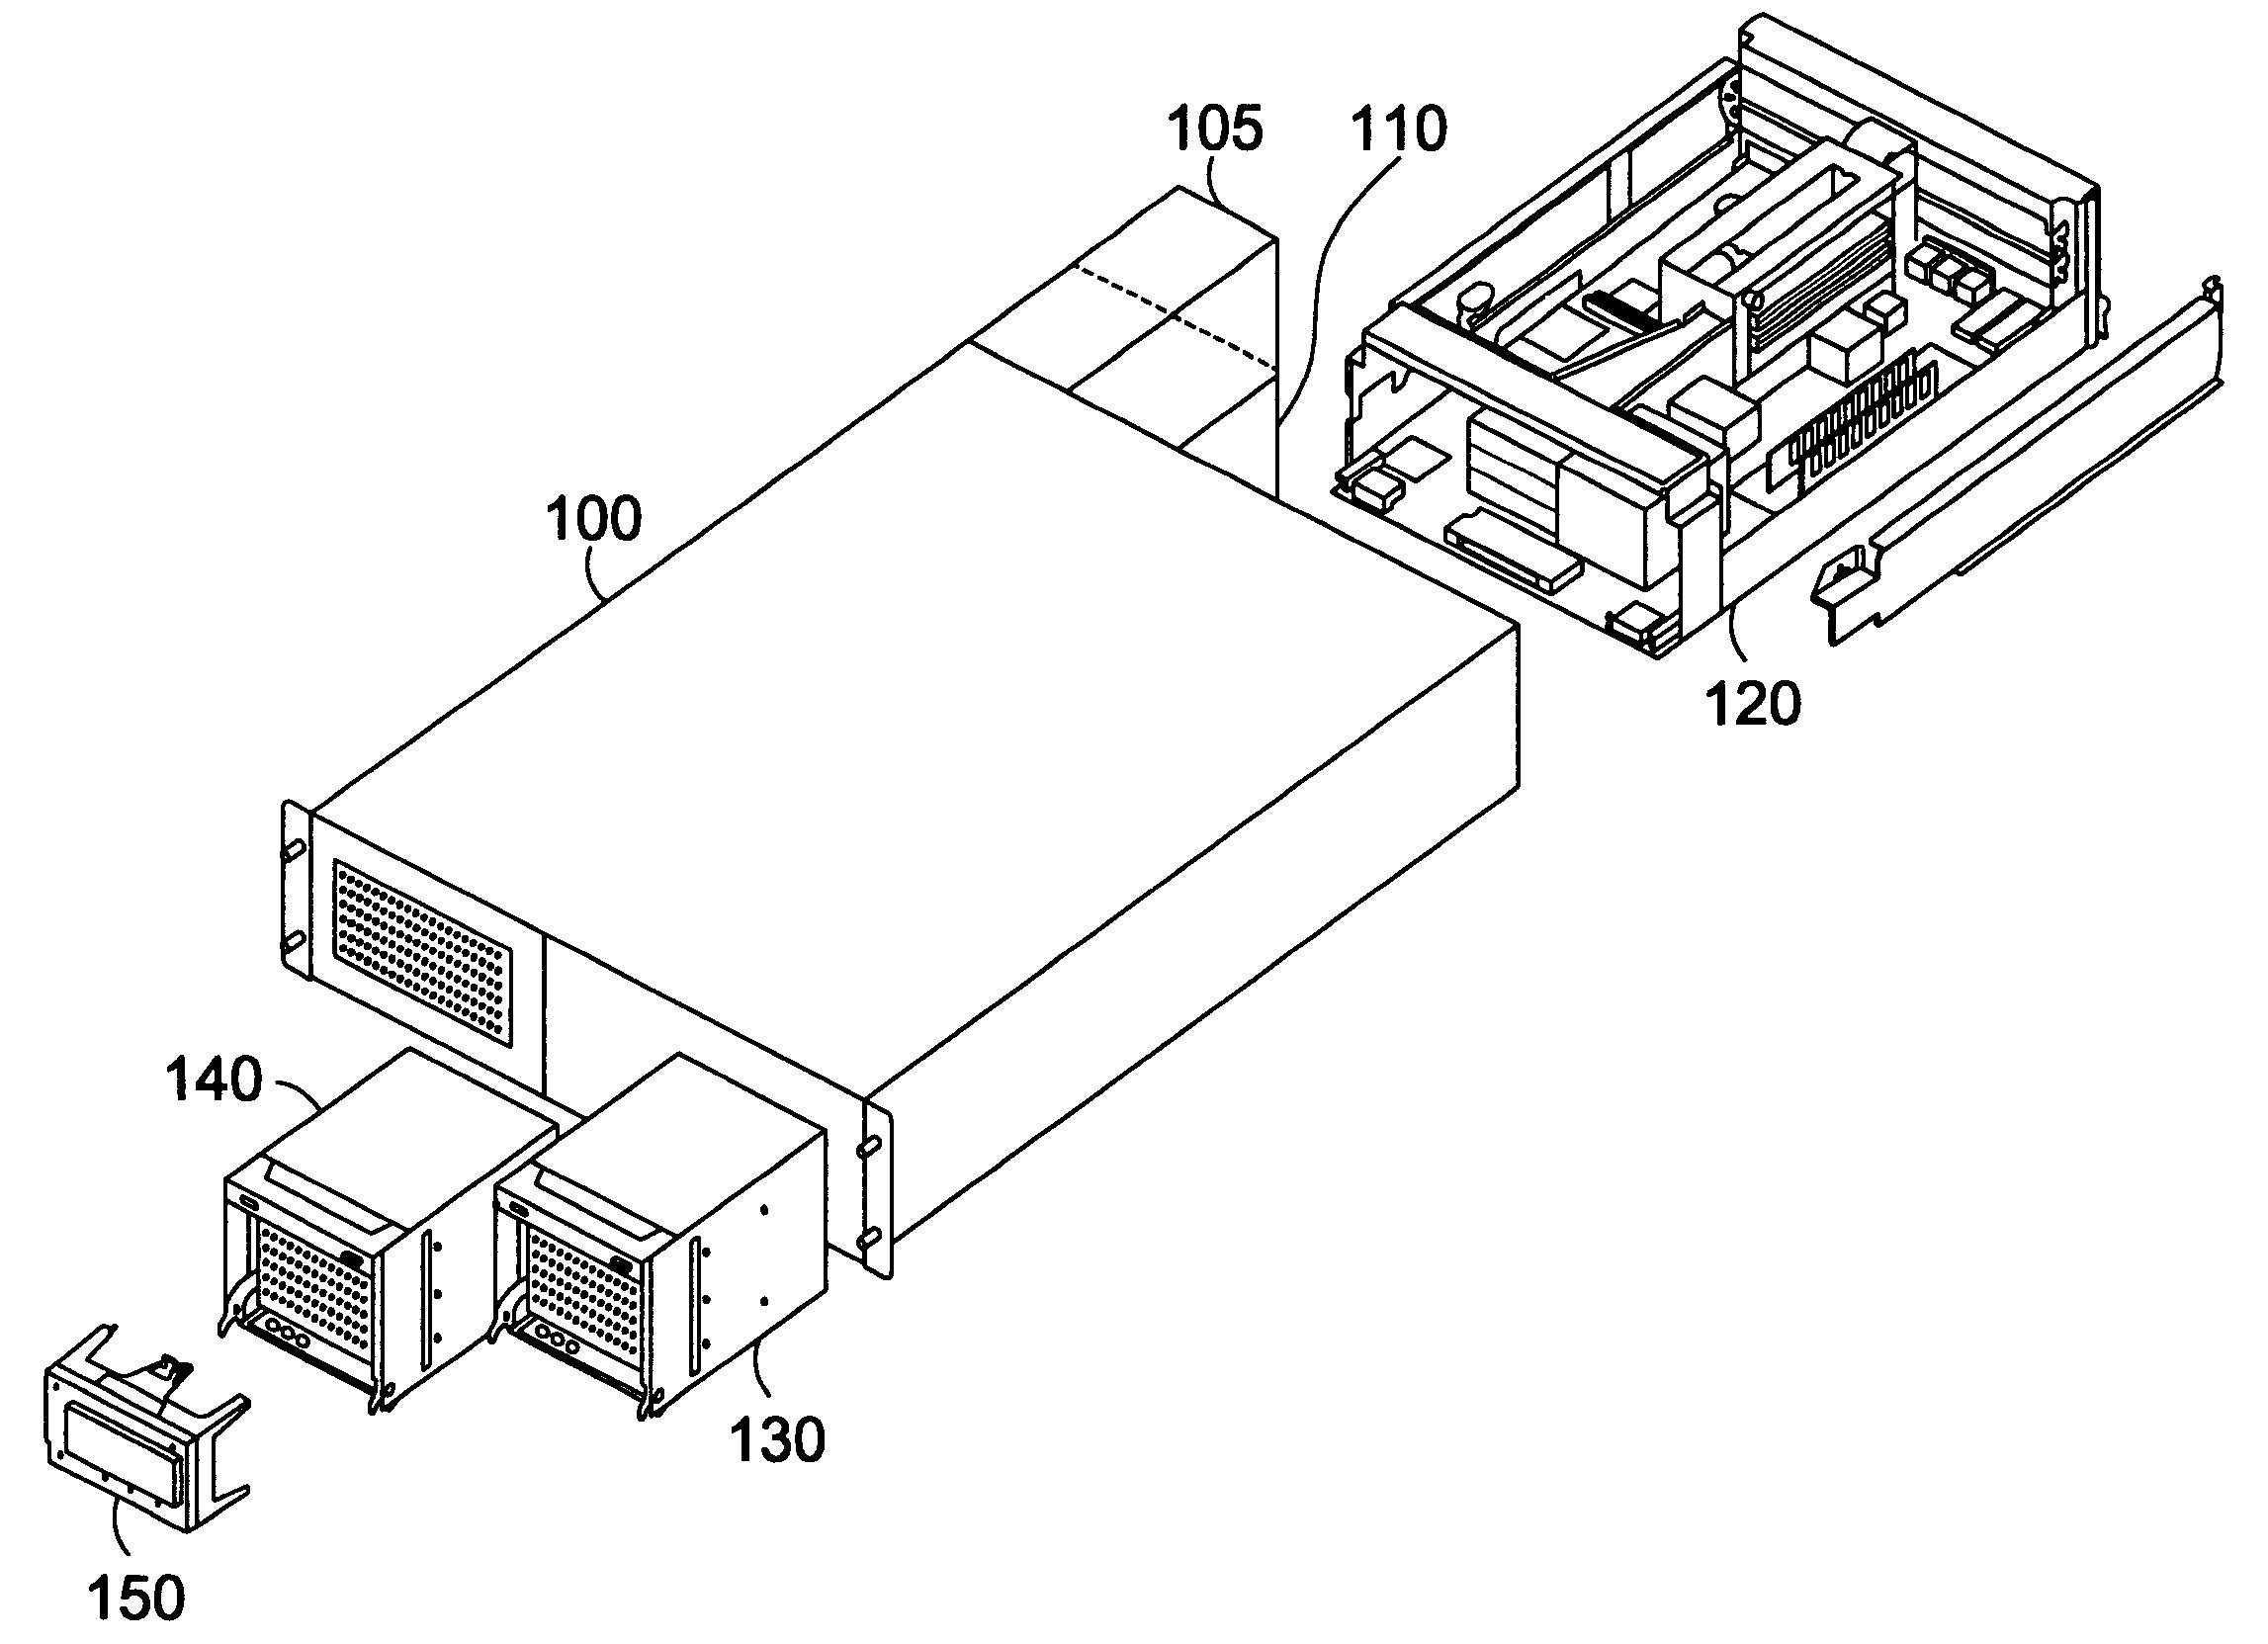 Storage system chassis and components